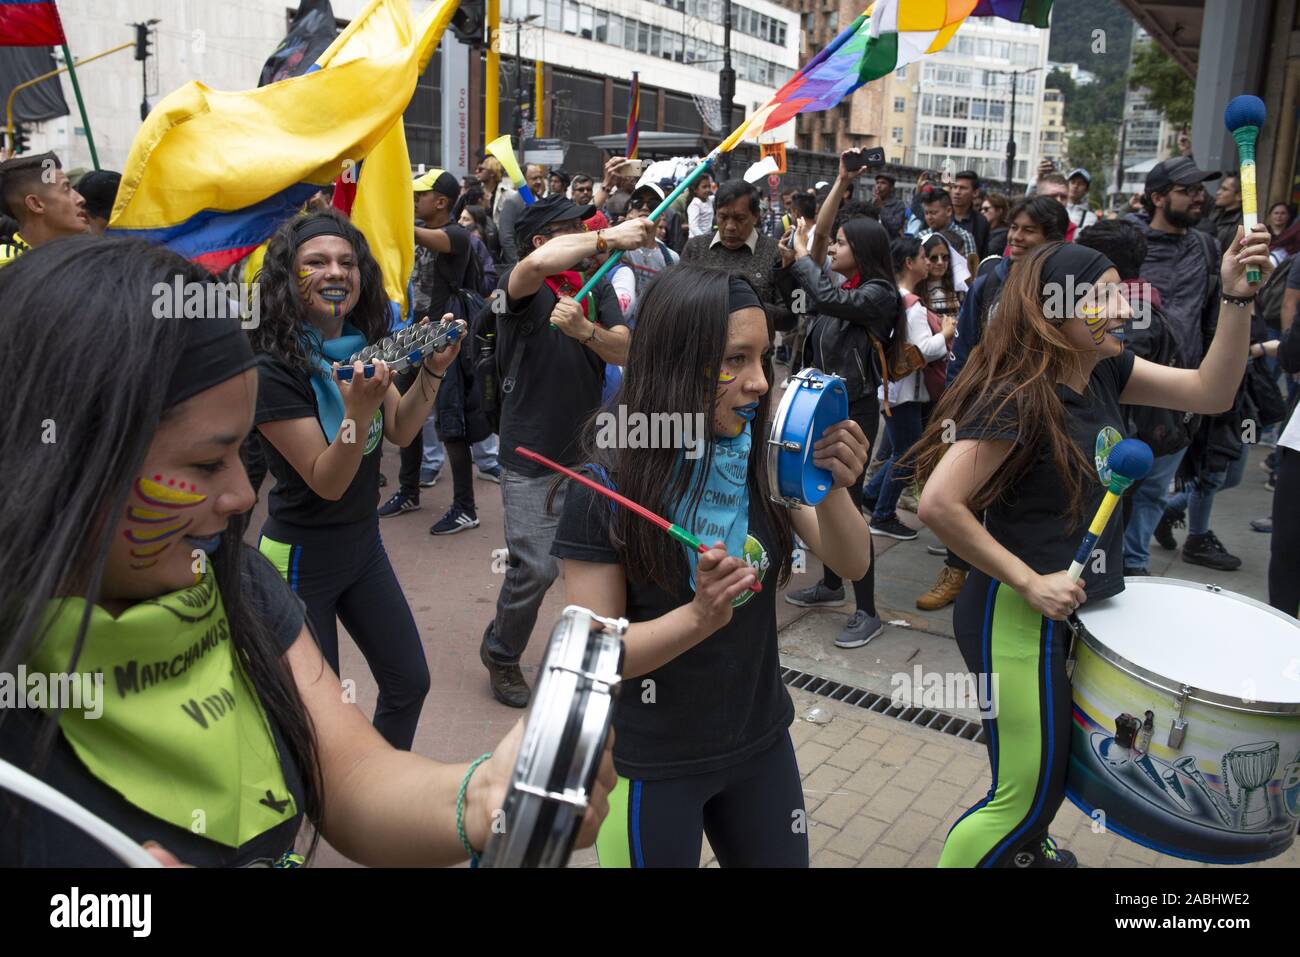 Bogota, Colombia. November 27, 2019: As Paro Nacional enters its seventh day, demonstrators march through the streets of central BogotÃ¡. On Tuesday, Colombia's President IvÃ¡n Duque met with the National Strike committee to address the wide range of issues being protested. Credit: Giles Campbell/ZUMA Wire/Alamy Live News Stock Photo